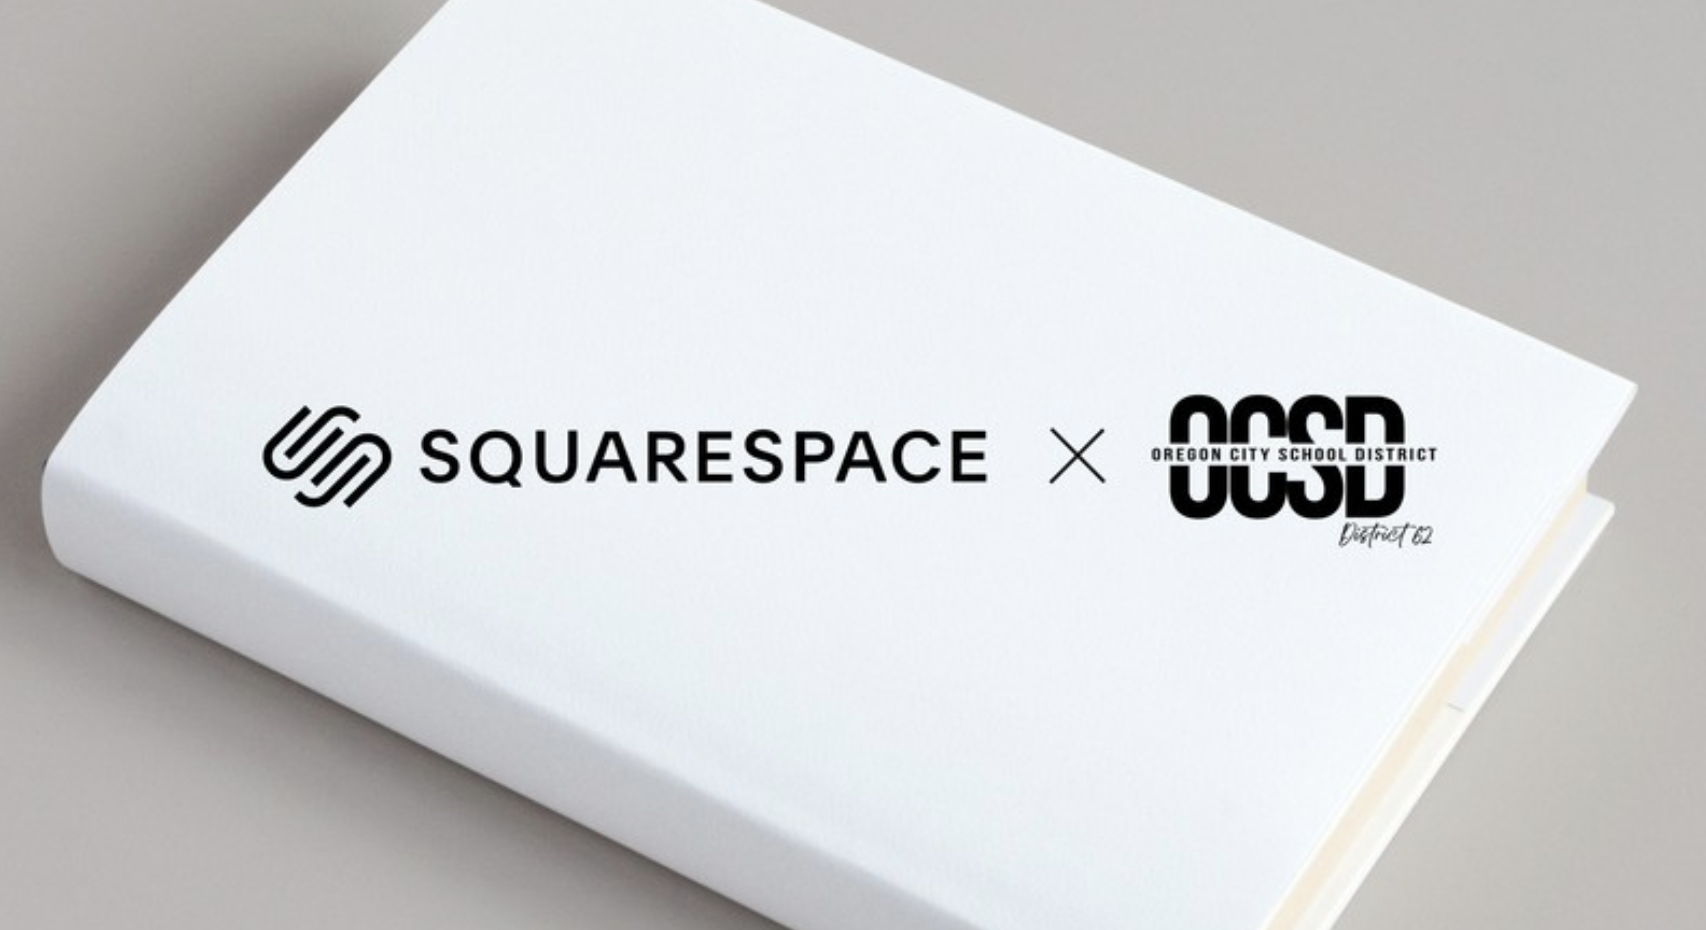 How Oregon City School District Improves Community and Staff Engagement with Squarespace Enterprise 